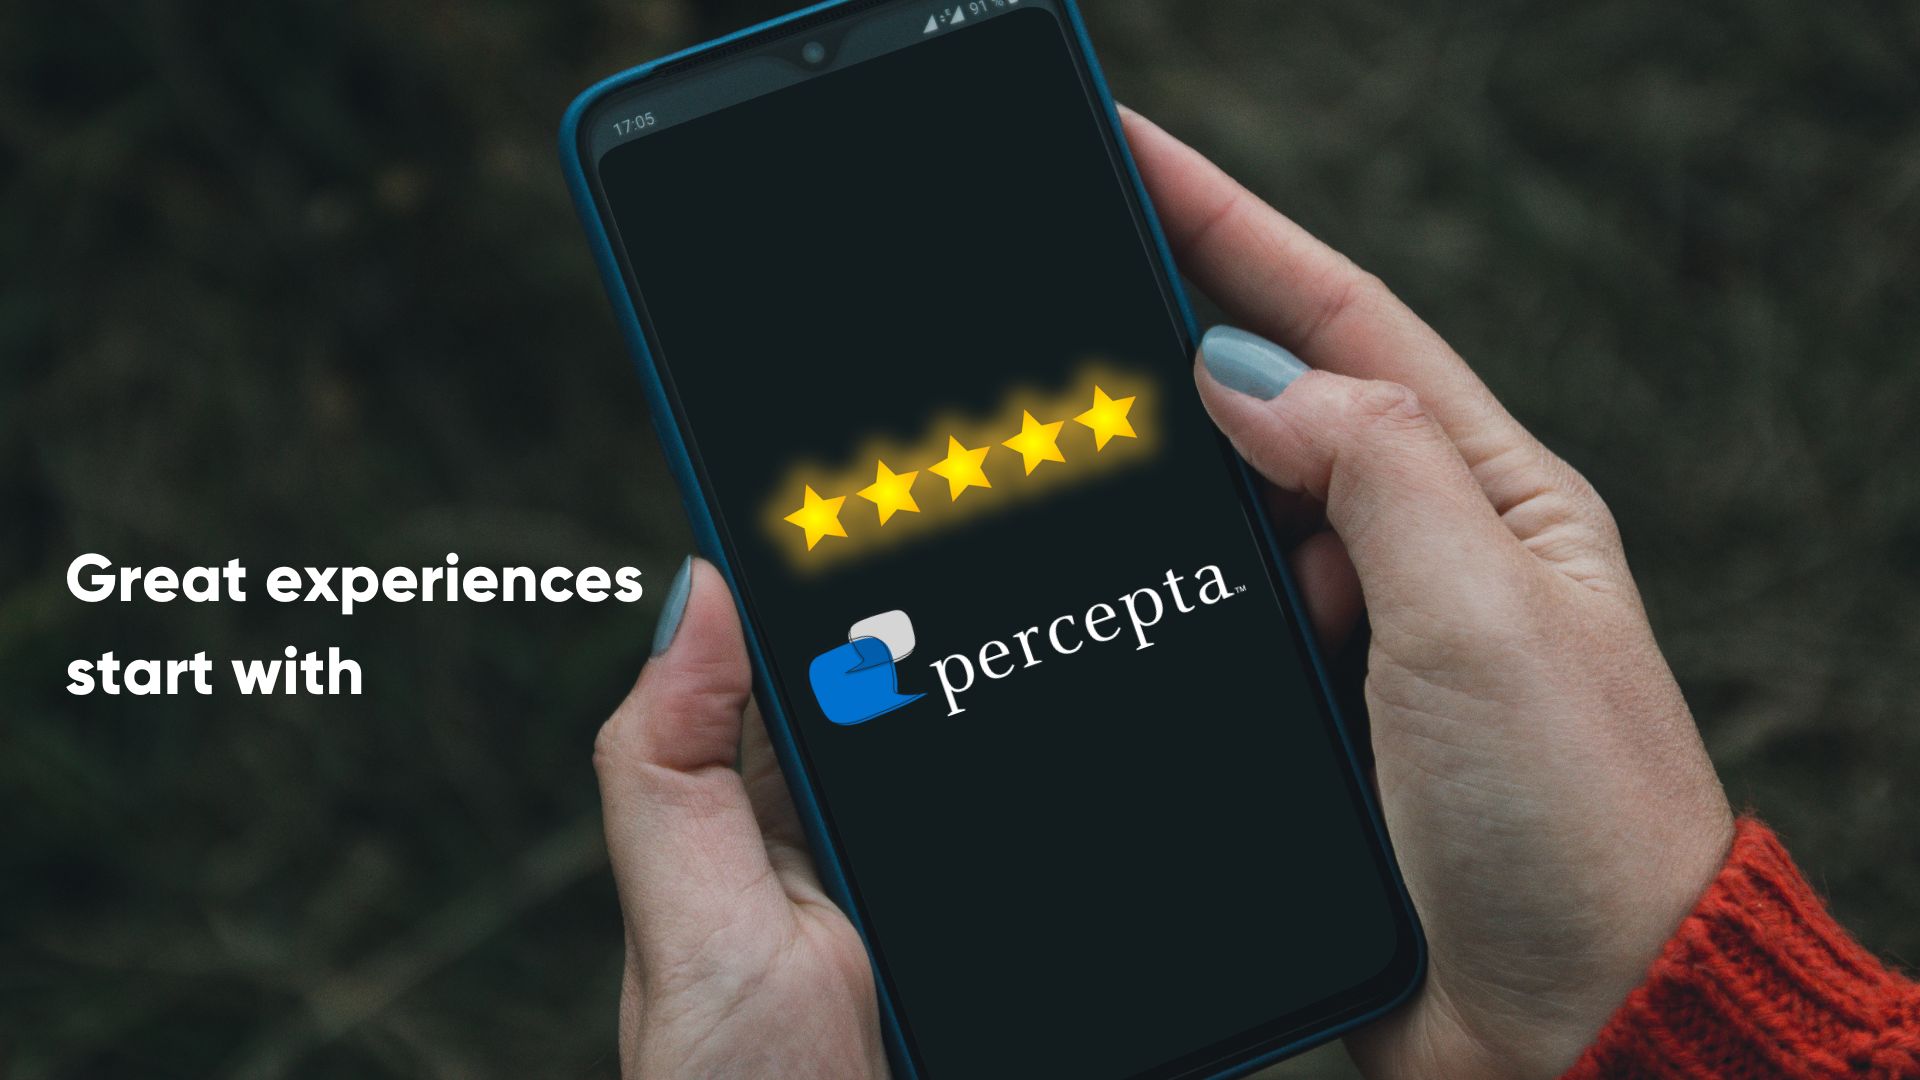 A person holds a smartphone in their hands, which displays 5 glowing stars and the Percepta logo. The text beside the phone says "Great experiences start with"